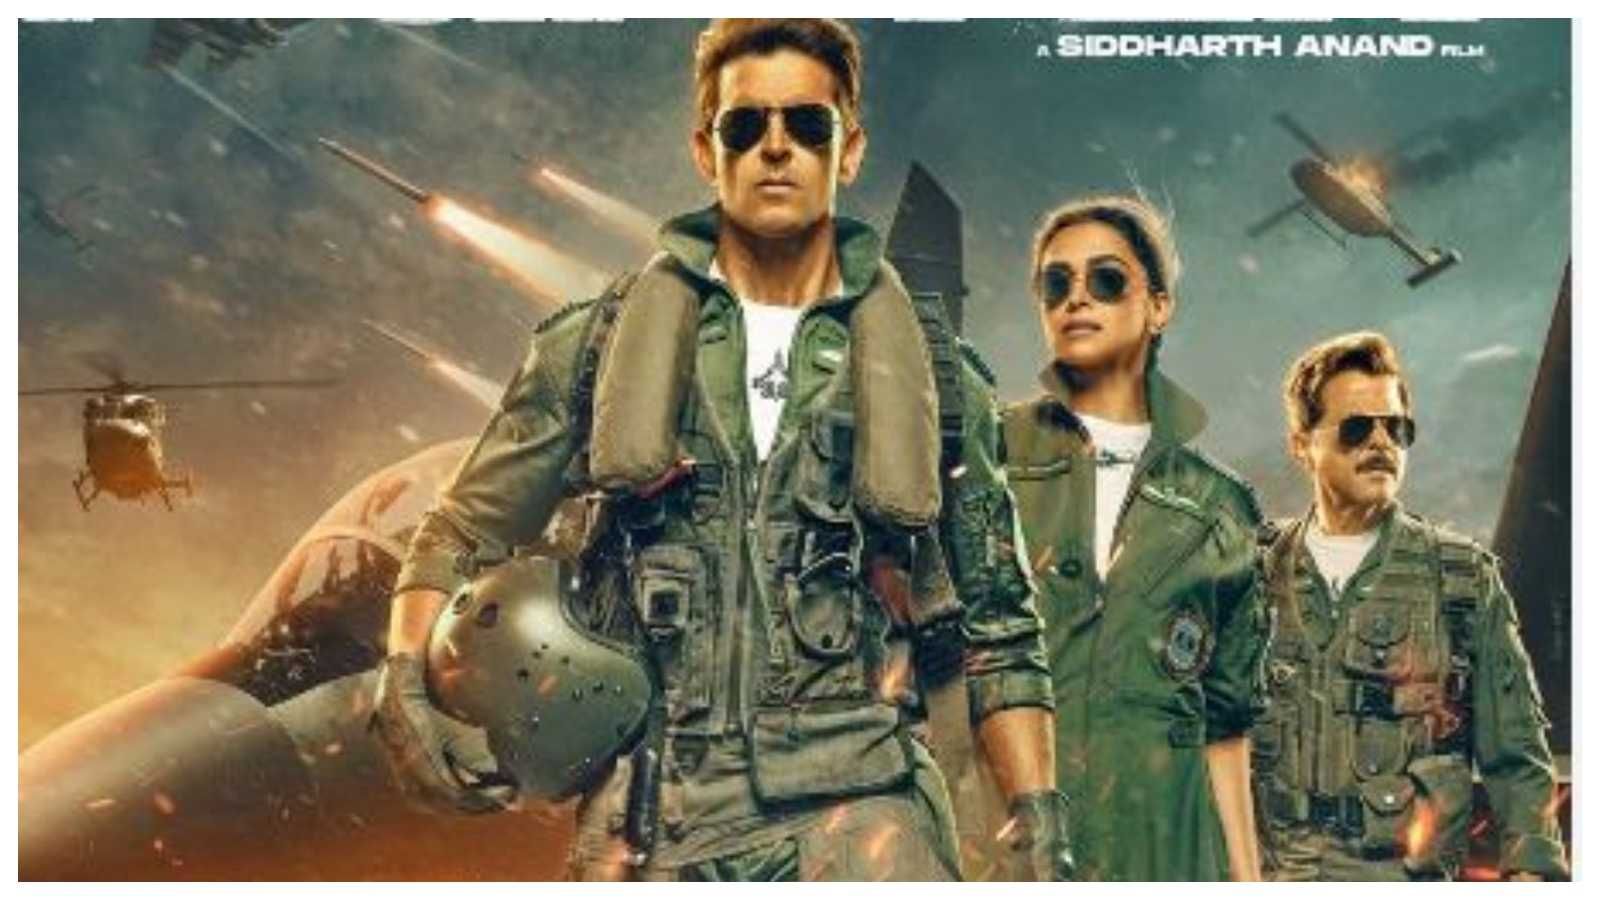 Fighter Advance Booking: Hrithik Roshan and Deepika Padukone's film eyes bumper opening, sells this many tickets